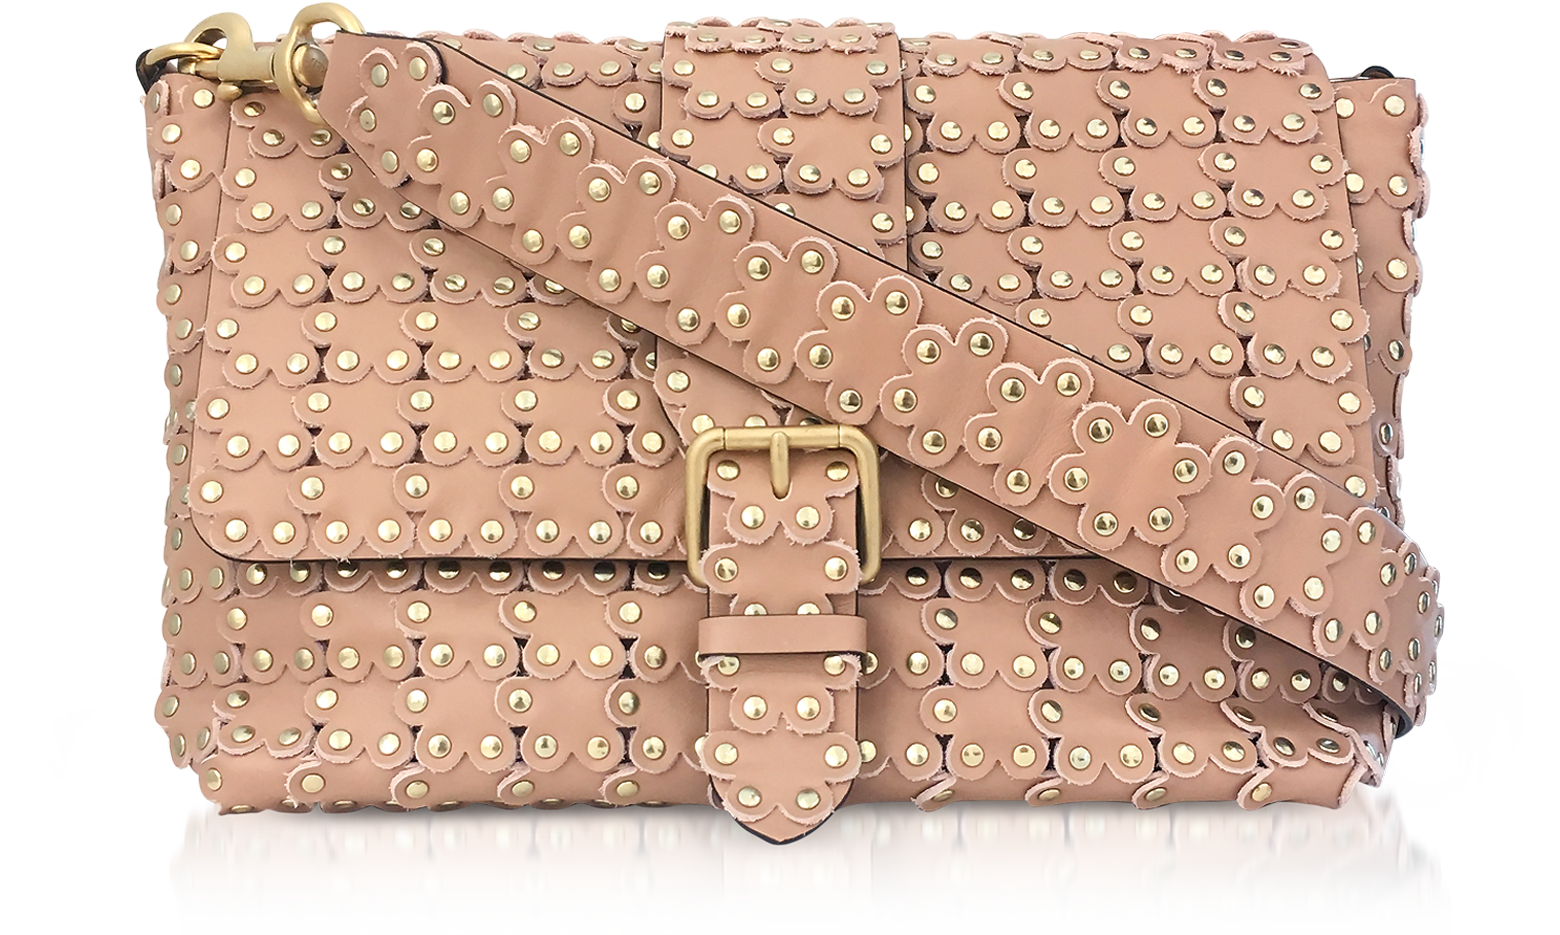 Nude Clutch with Insert - Women's Bags + Purses